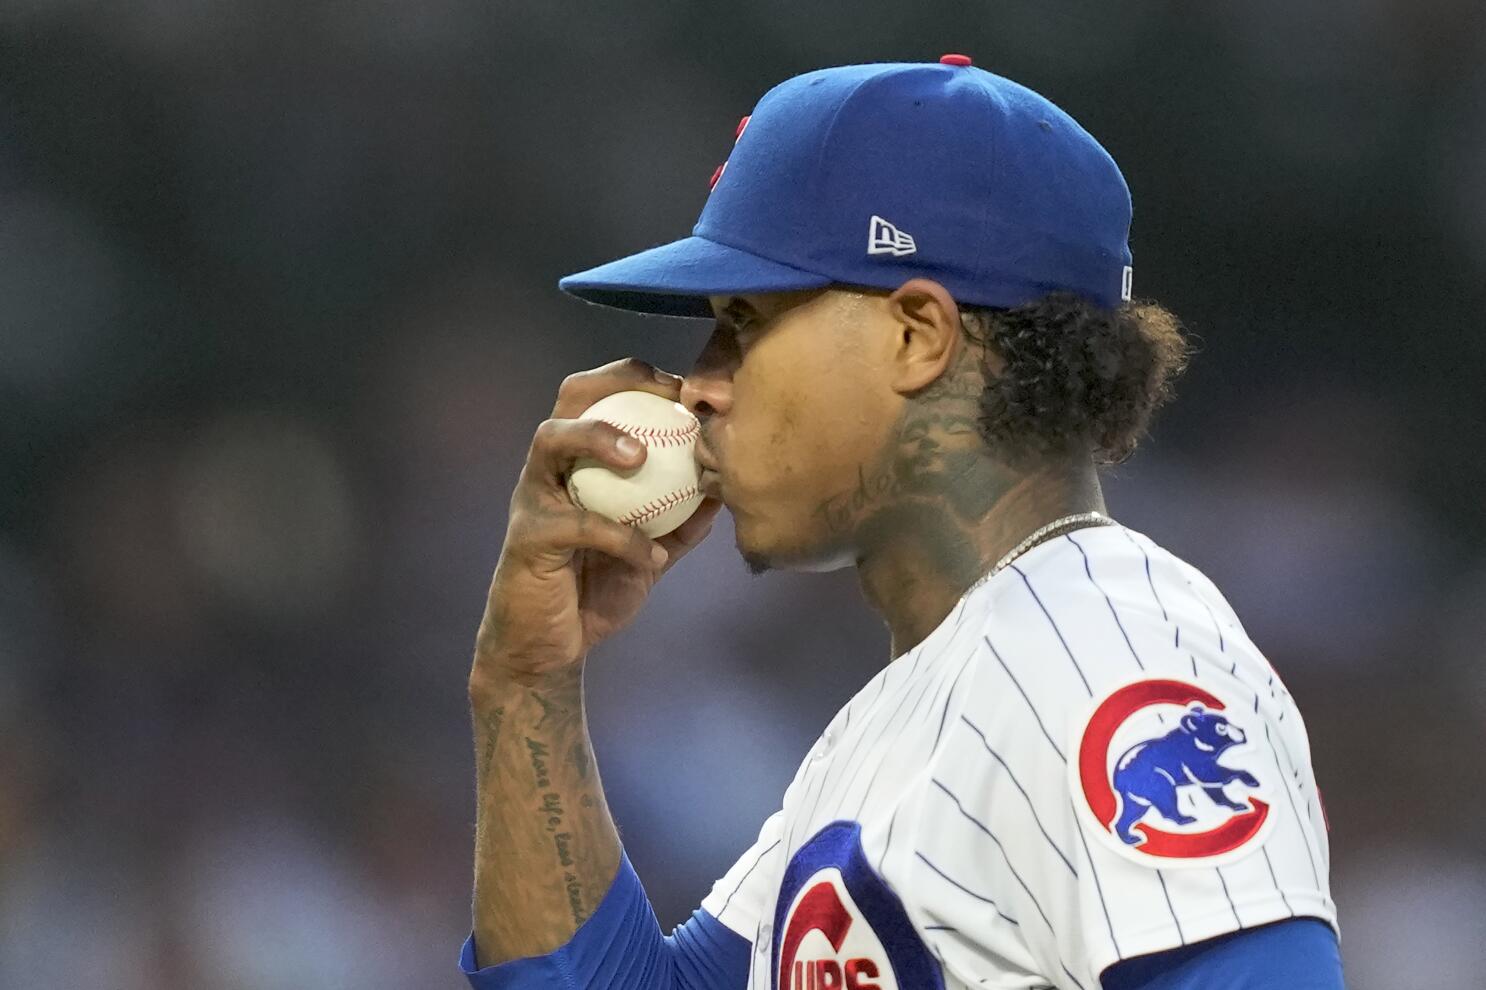 Marcus Stroman: Chicago Cubs pitcher meets 8-year-old fan